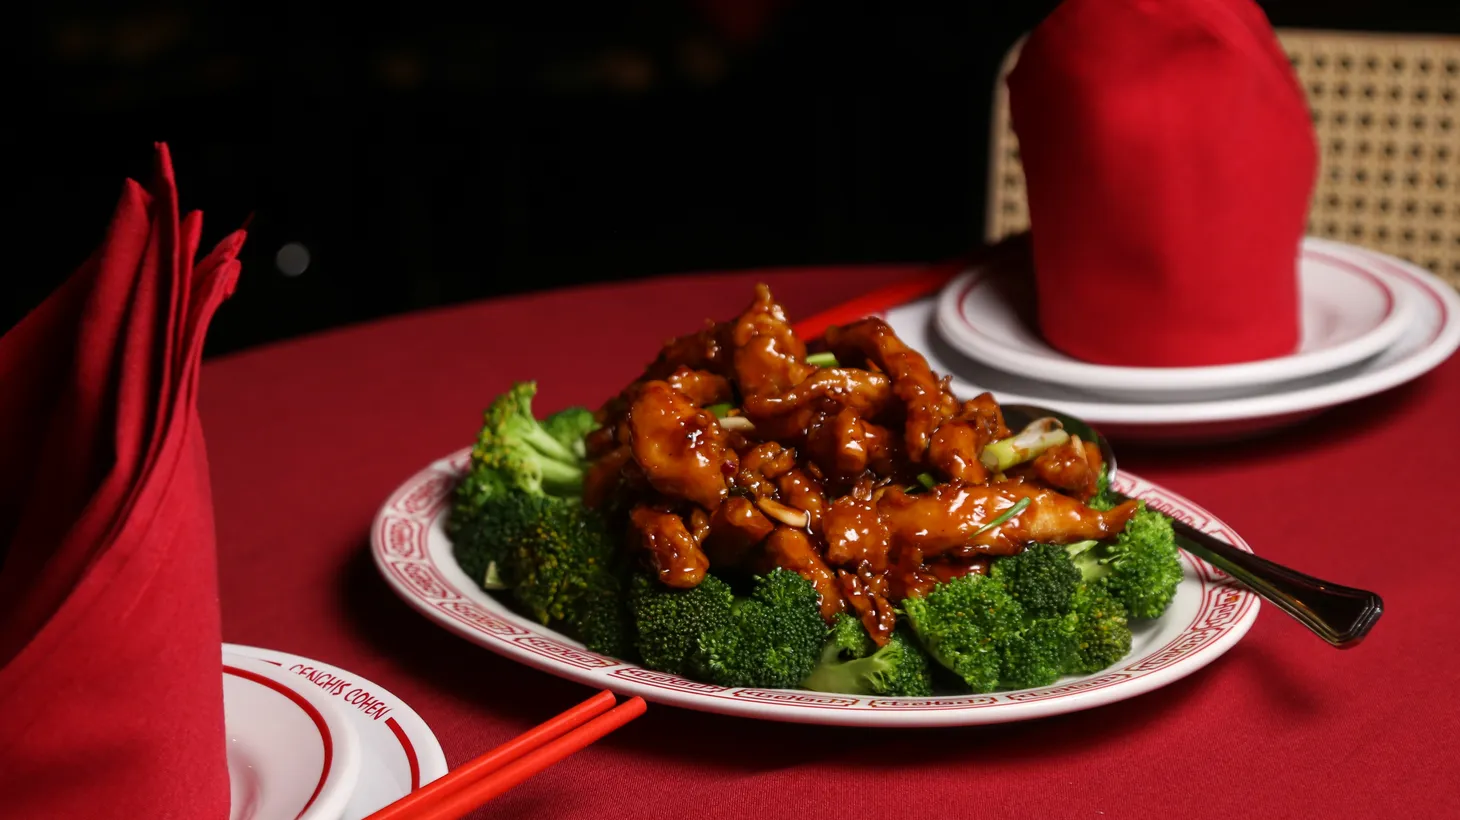 "This was as authentic a style of New York Chinese food as I could find," says Marc Rose, co-owner of Genghis Cohen in the Fairfax District.